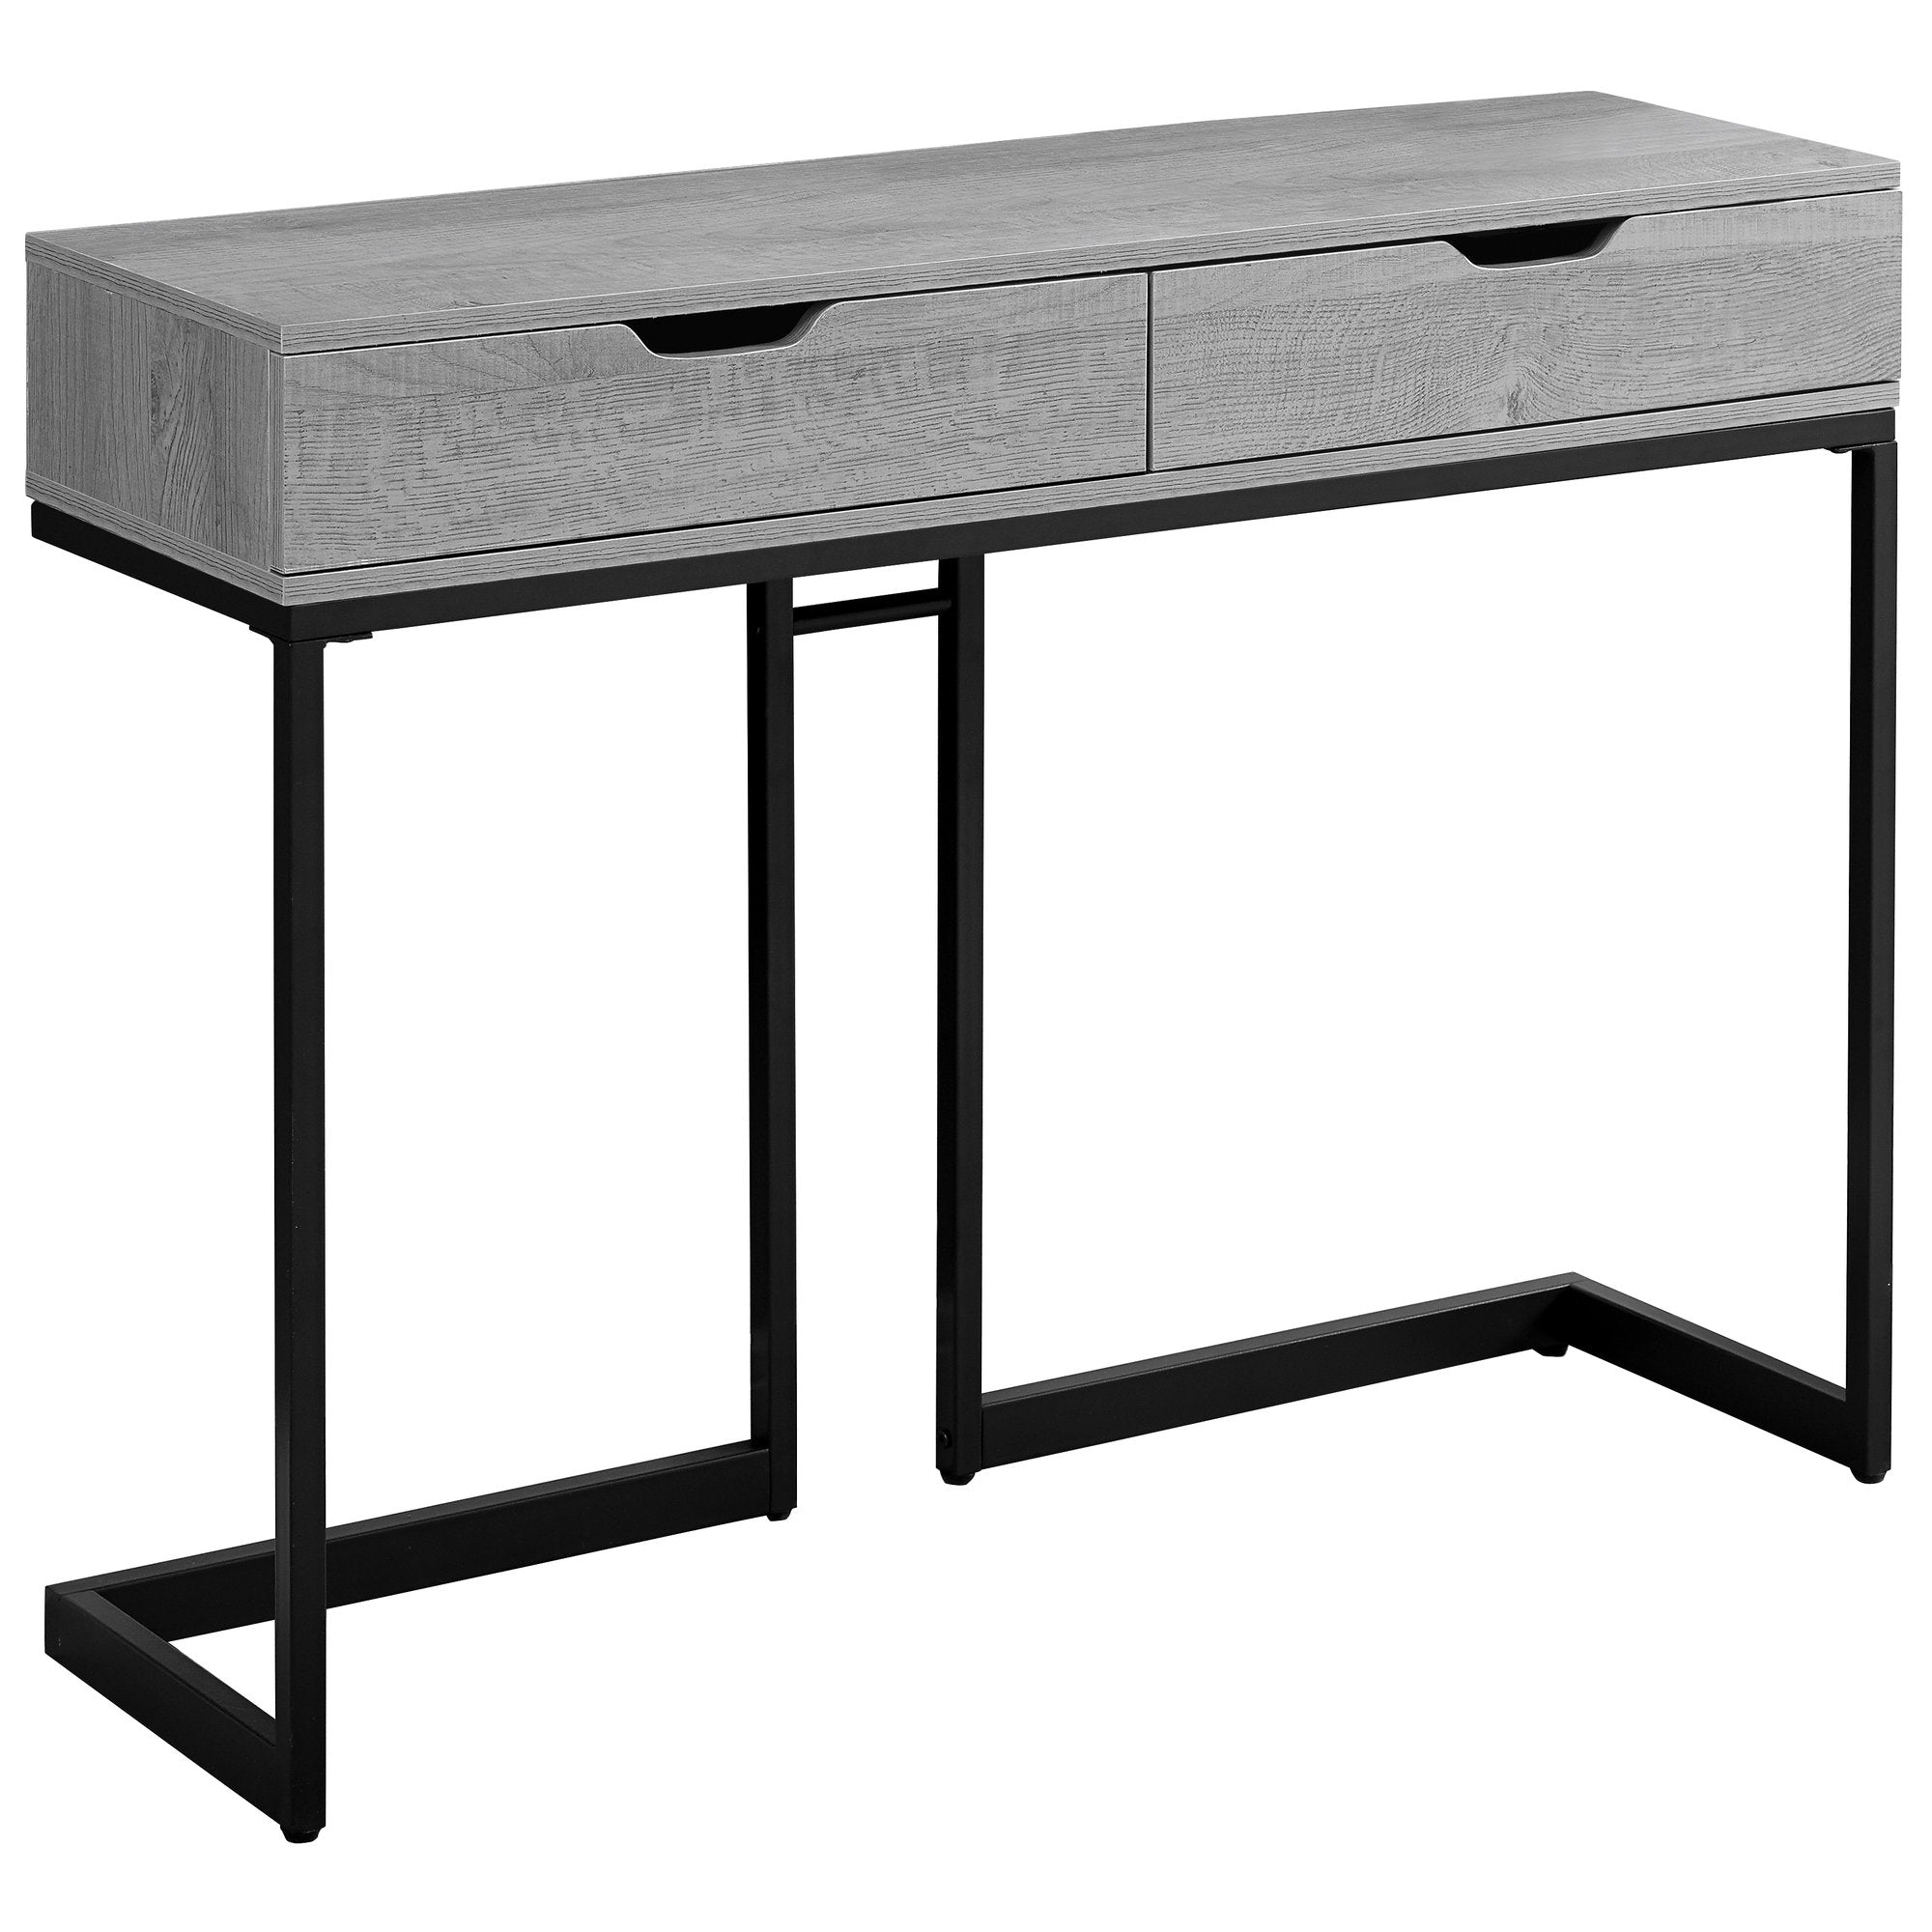 Accent Table - 42L / Grey/ Black Metal Hall Console